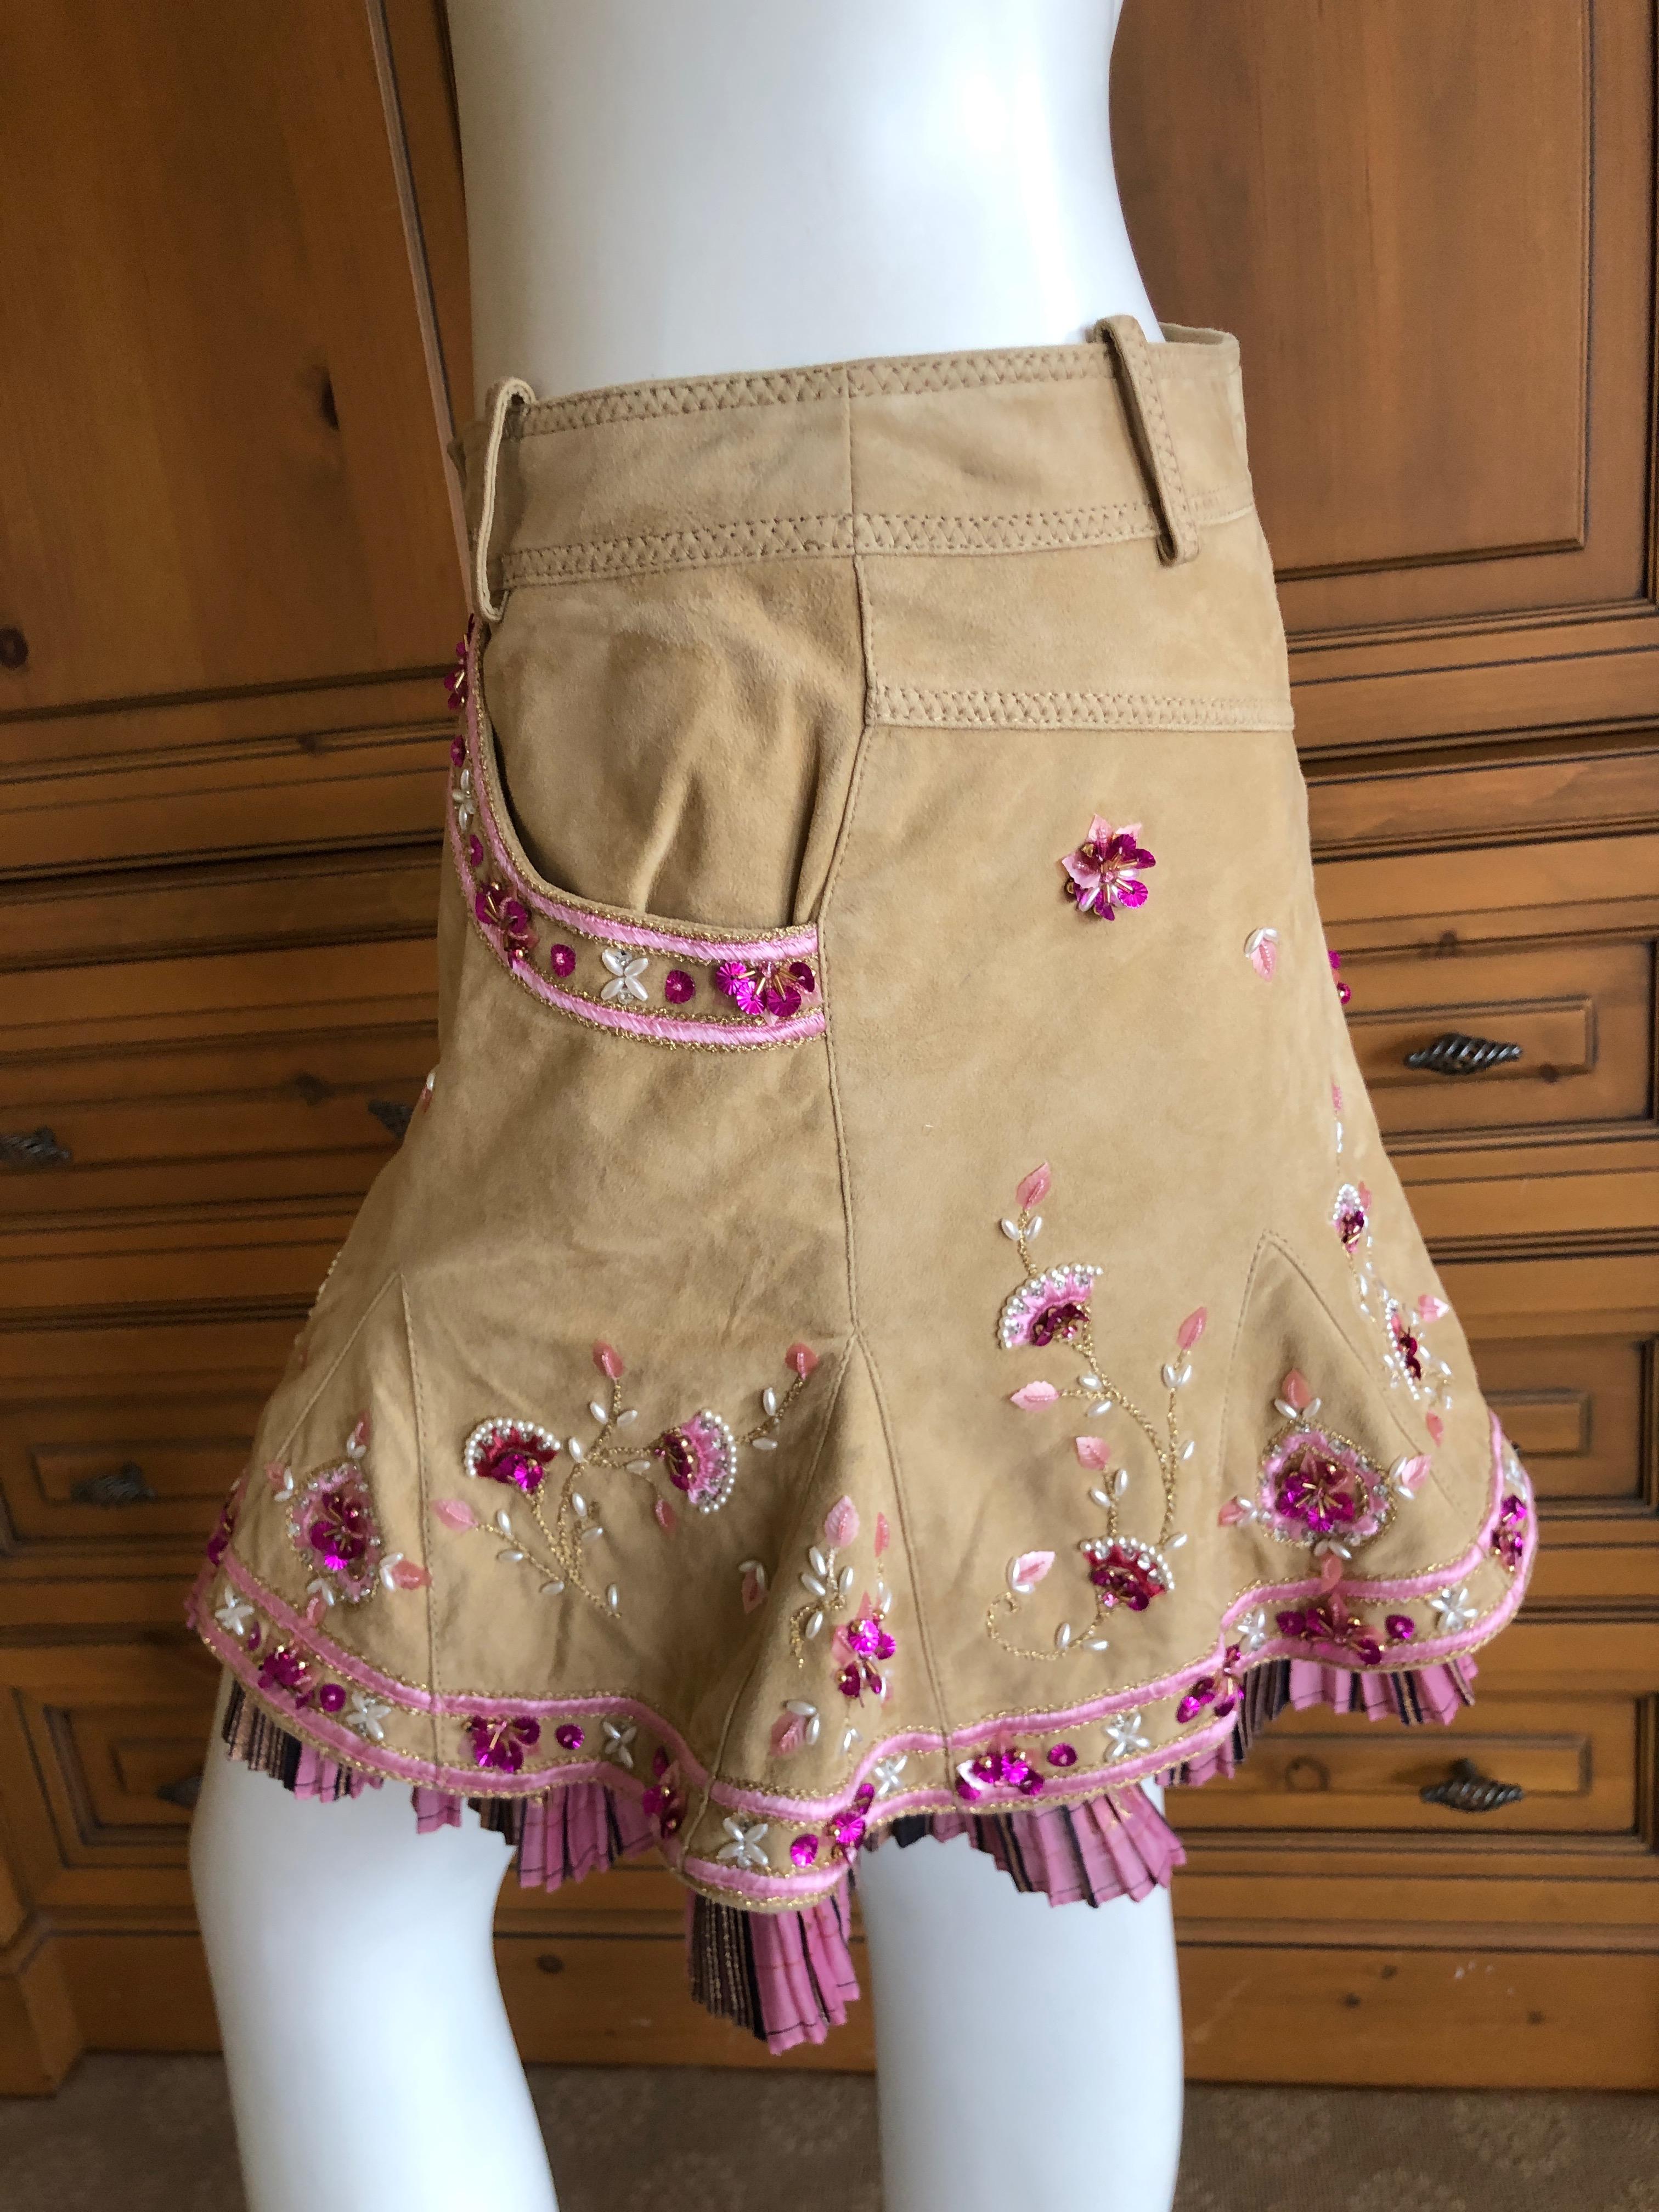 Christian Dior by John Galliano Vintage Tan Suede Mini Skirt Sz 38 In Excellent Condition For Sale In Cloverdale, CA